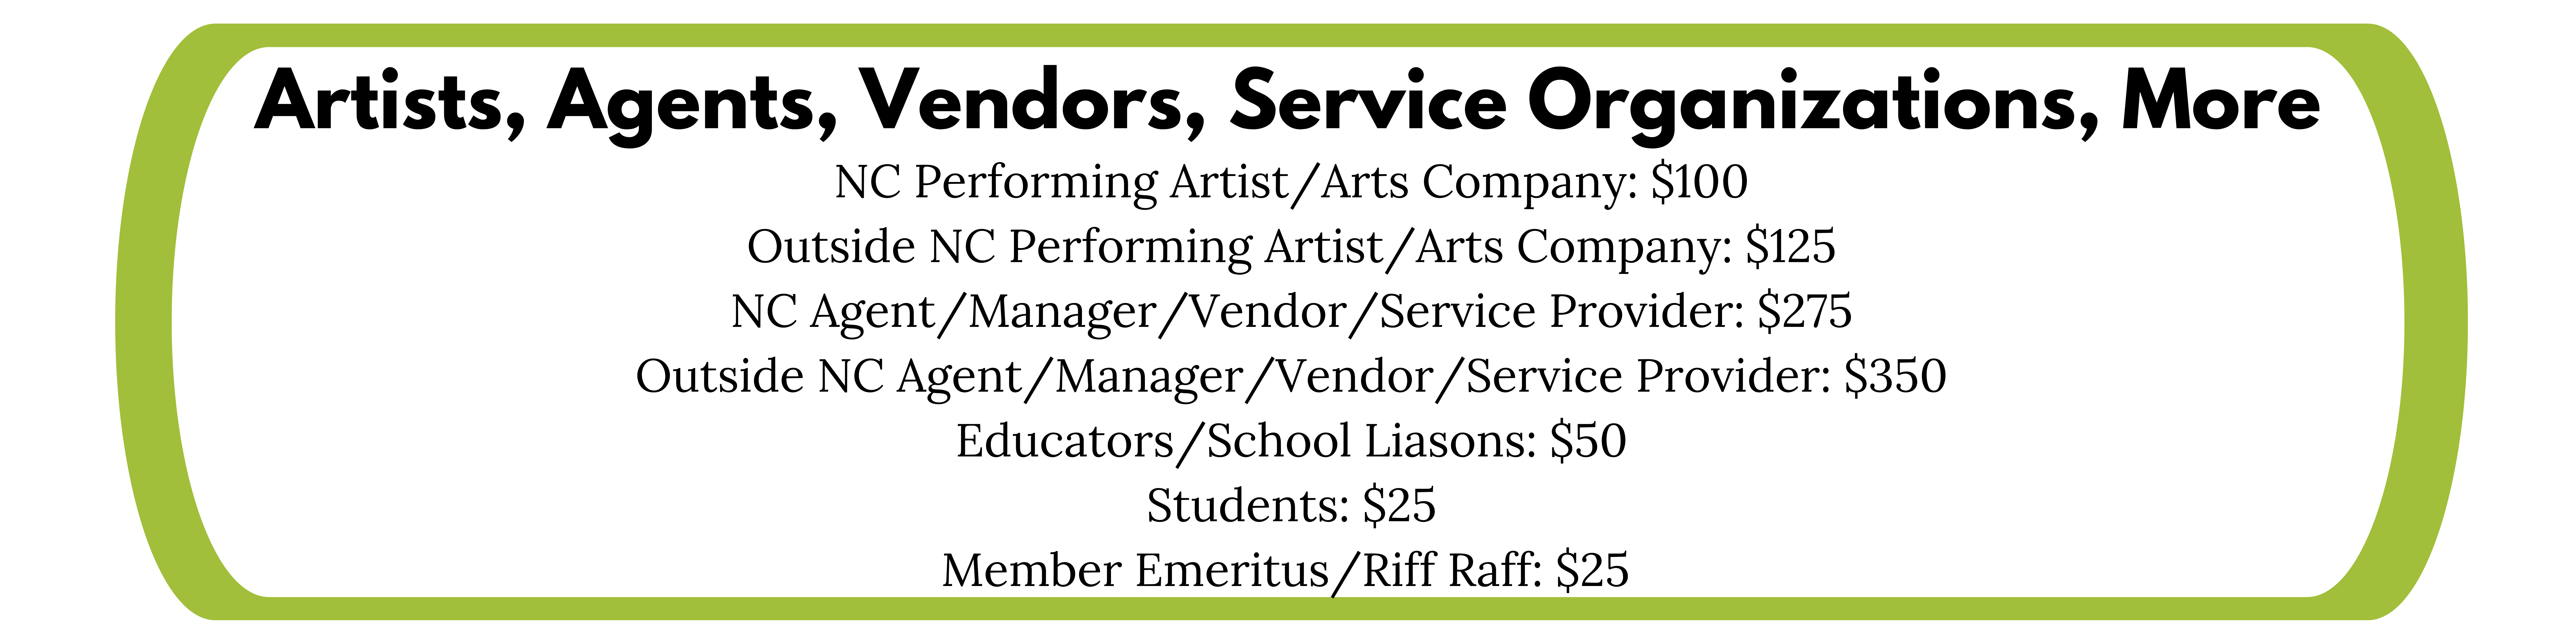 Artists, agents, vendors, service organizations and more dues